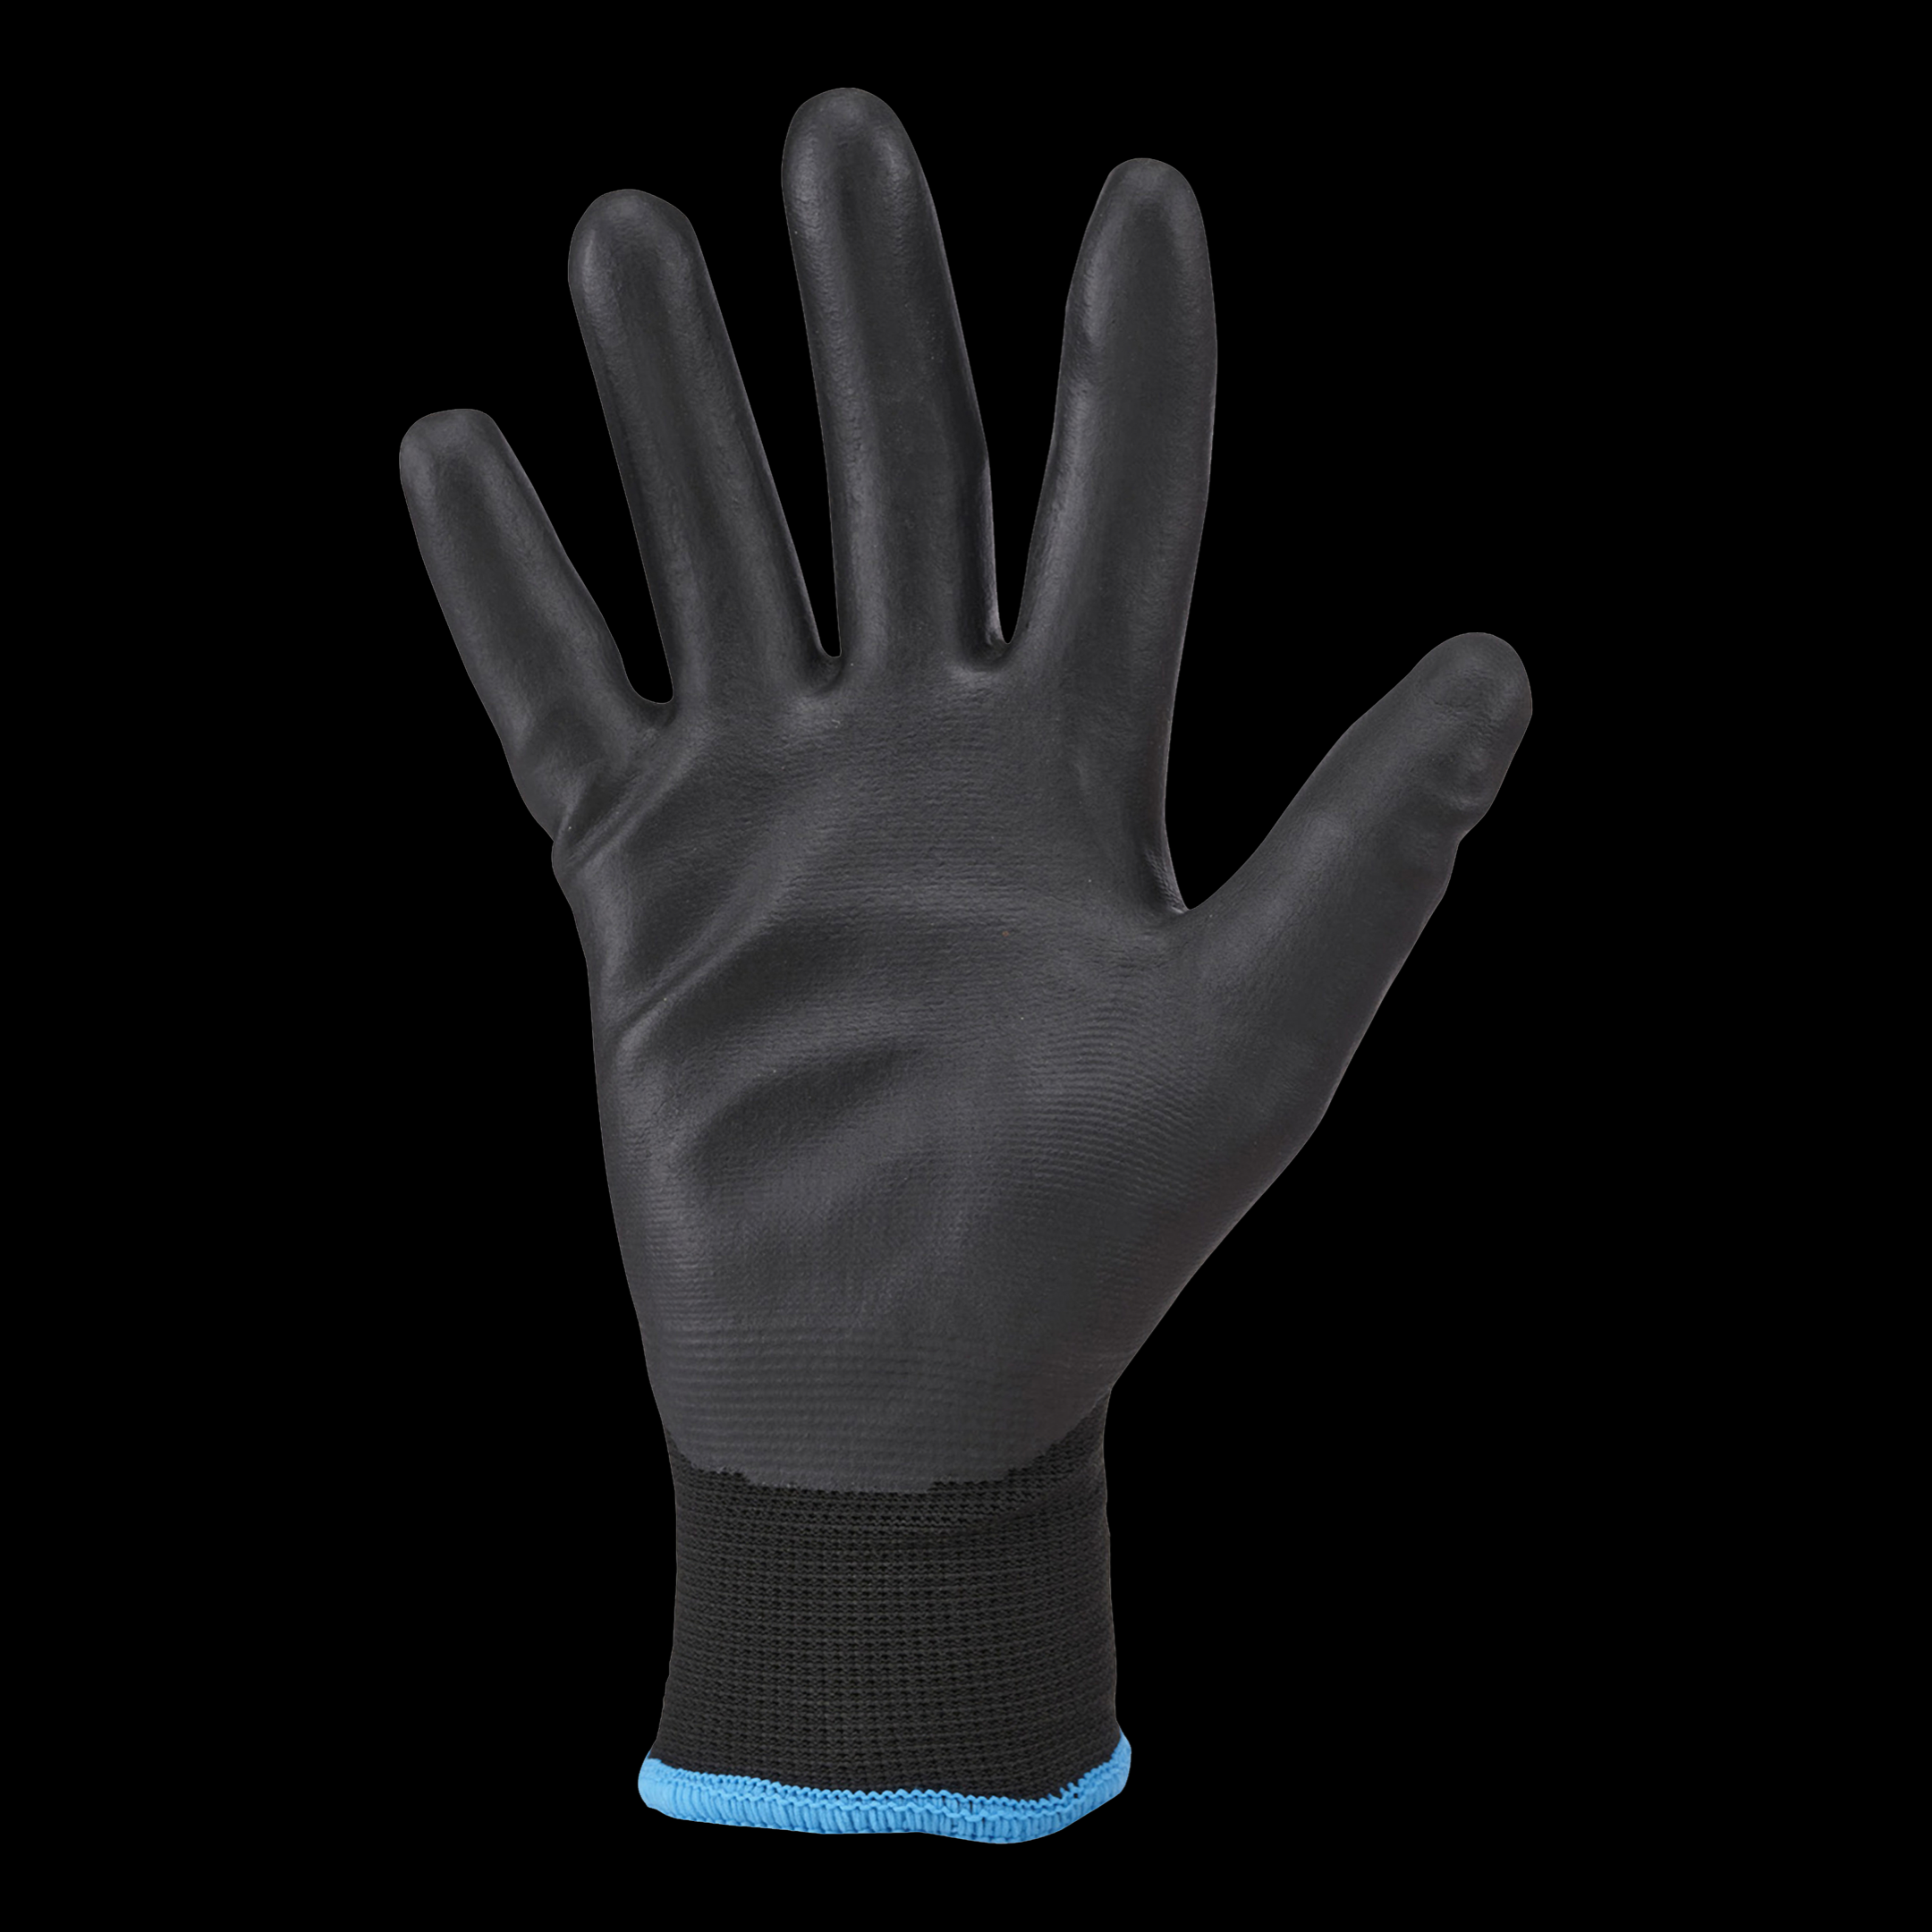 GORILLA GRIP INSULATED COLD WEATHER GLOVES - Large